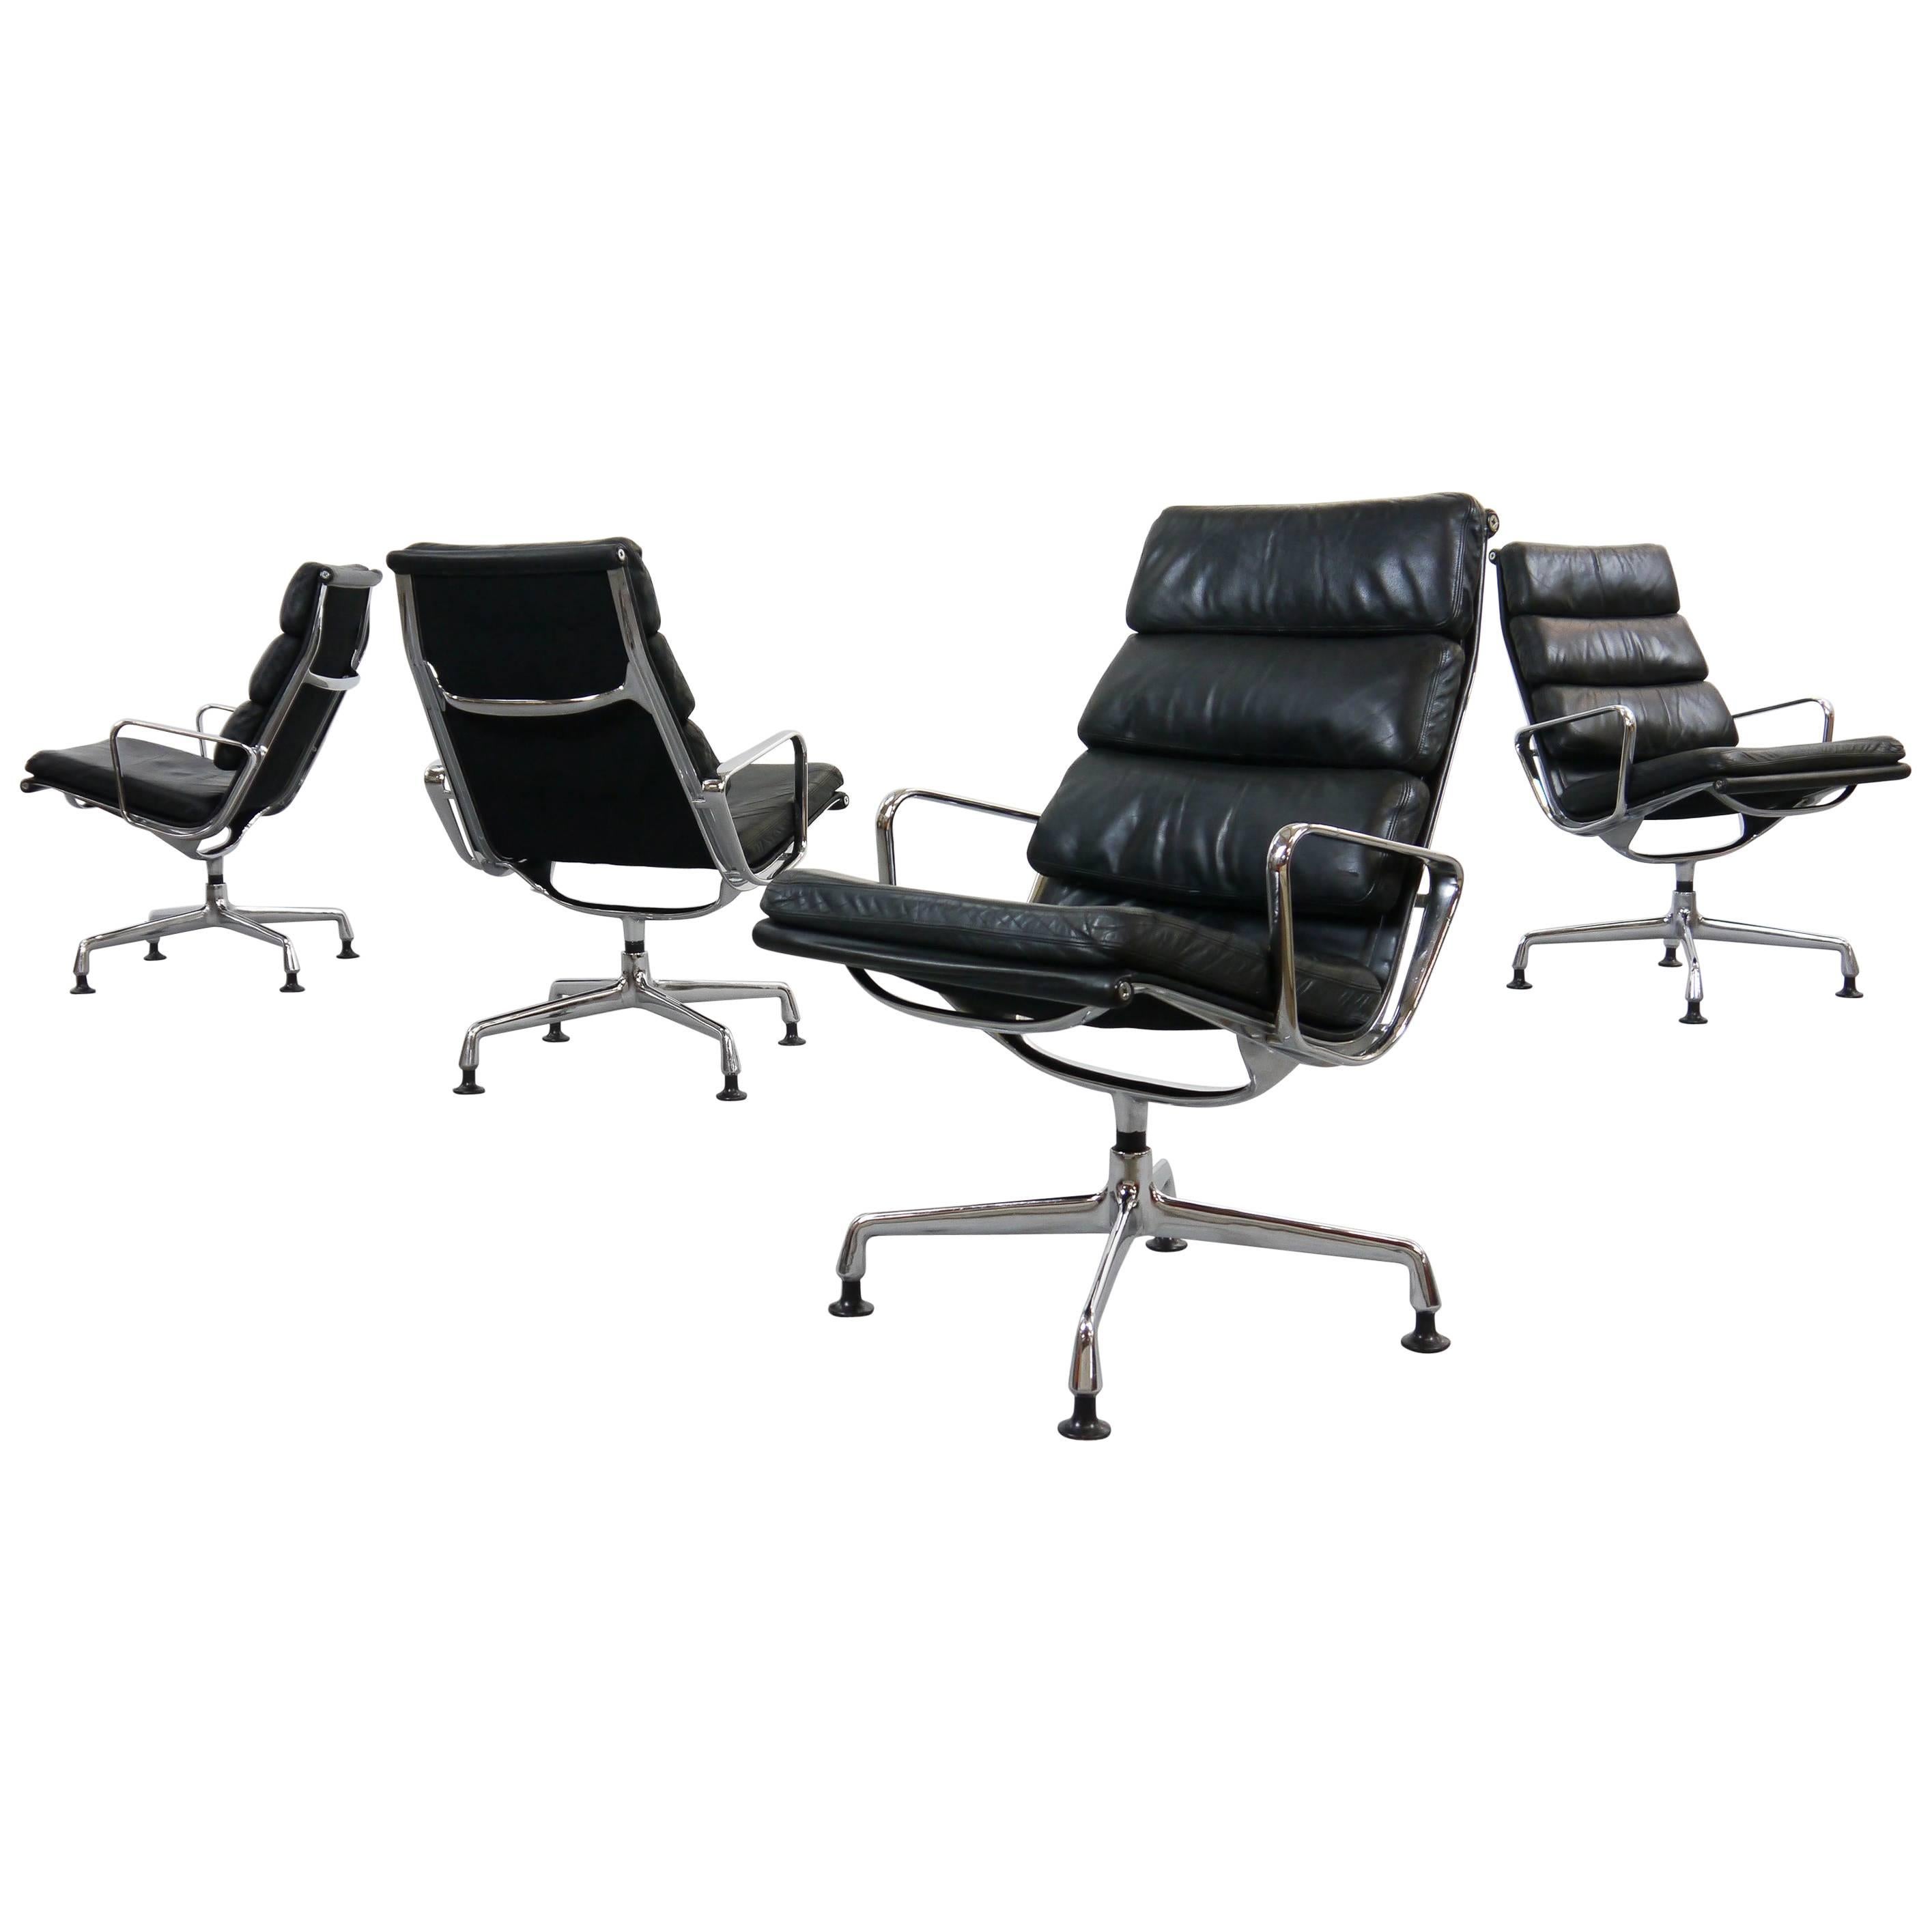 Charles Eames Soft Pad Chairs EA 216 Herman Miller / Fehlbaum in Black Leather